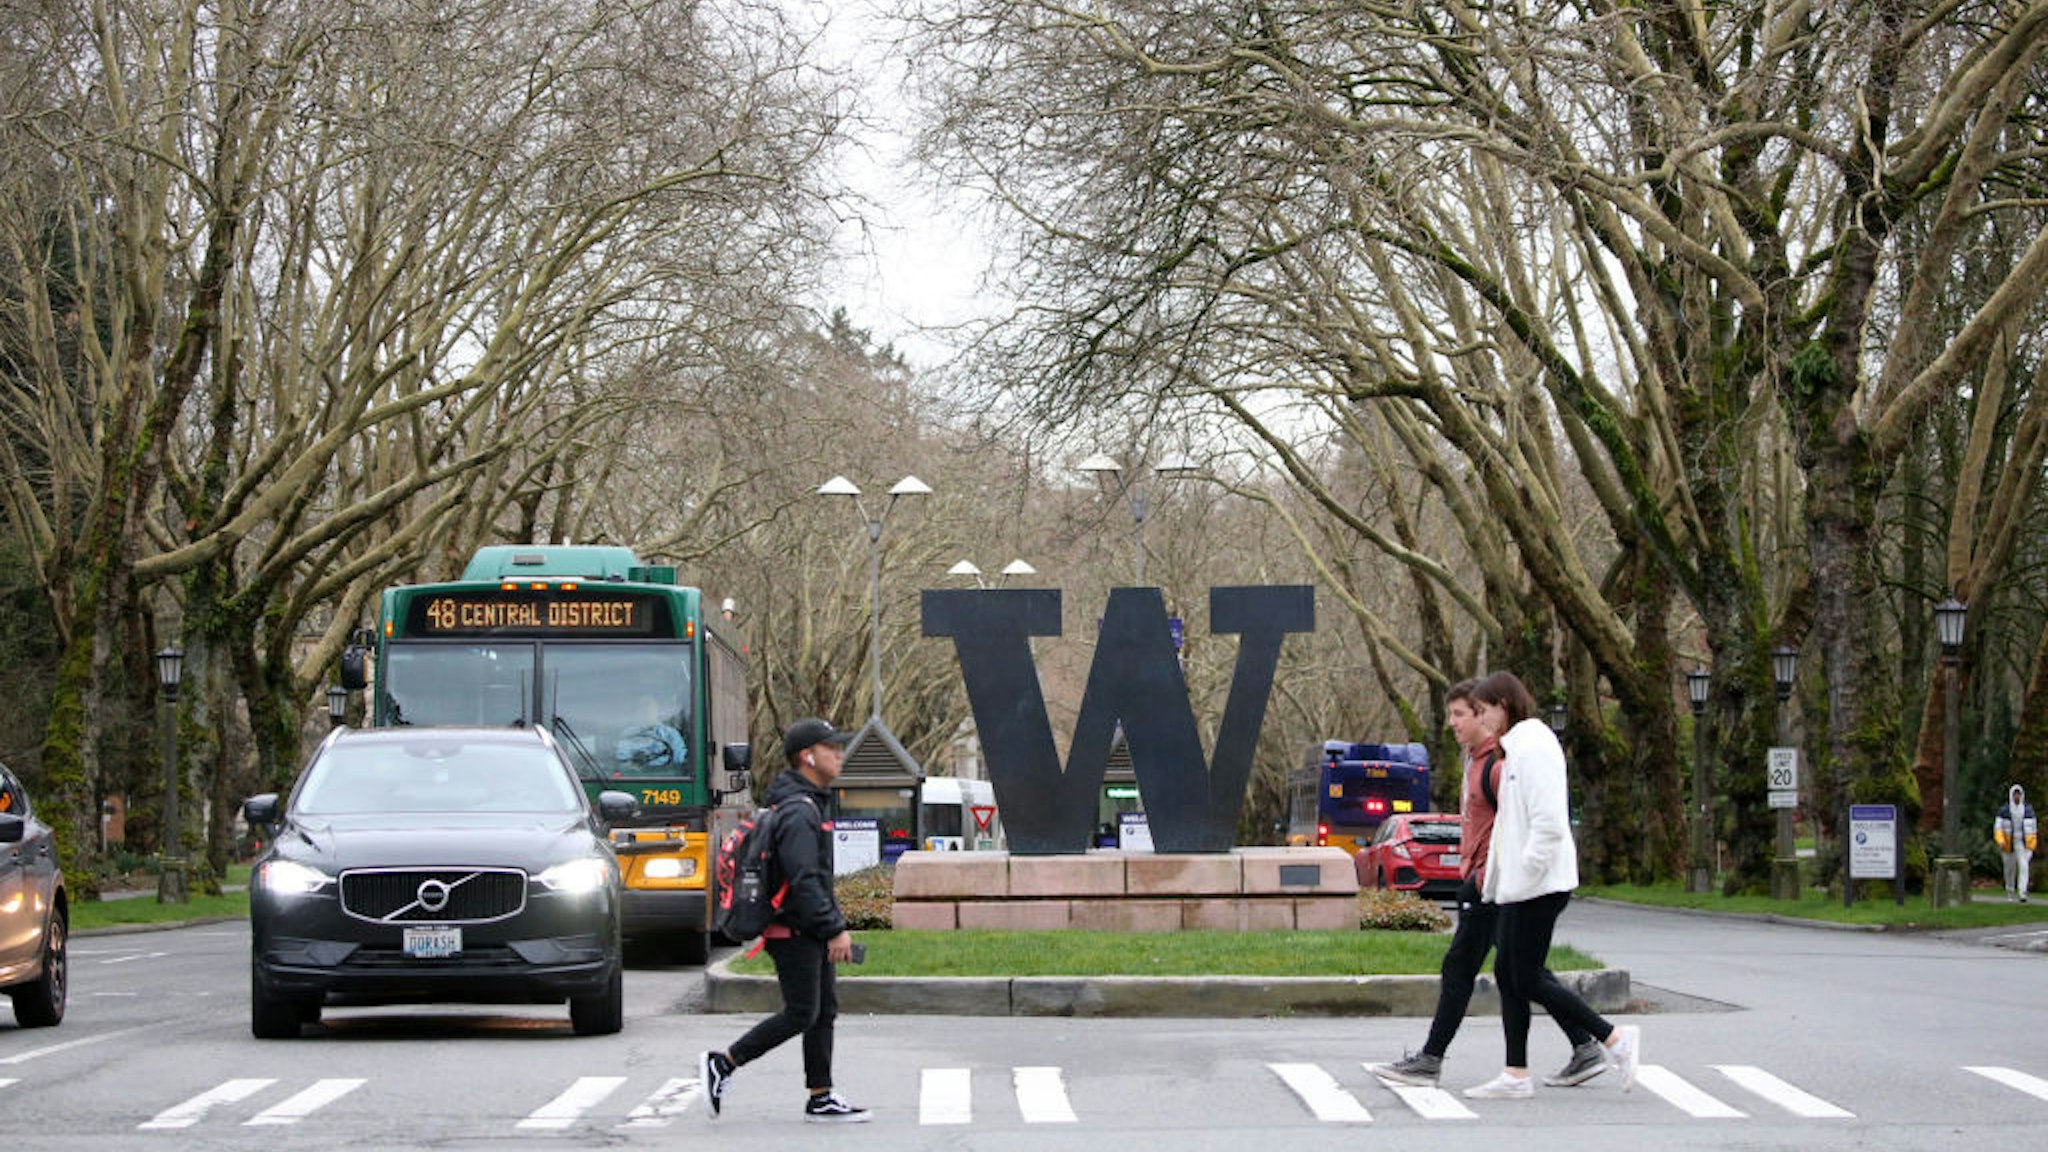 Students at the University of Washington are on campus for the last day of in-person classes on March 6, 2020 in Seattle, Washington. The University will close starting Monday, March 9, as a precautionary reaction to the novel coronavirus, COVID-19, outbreak for the remainder of the winter quarter.